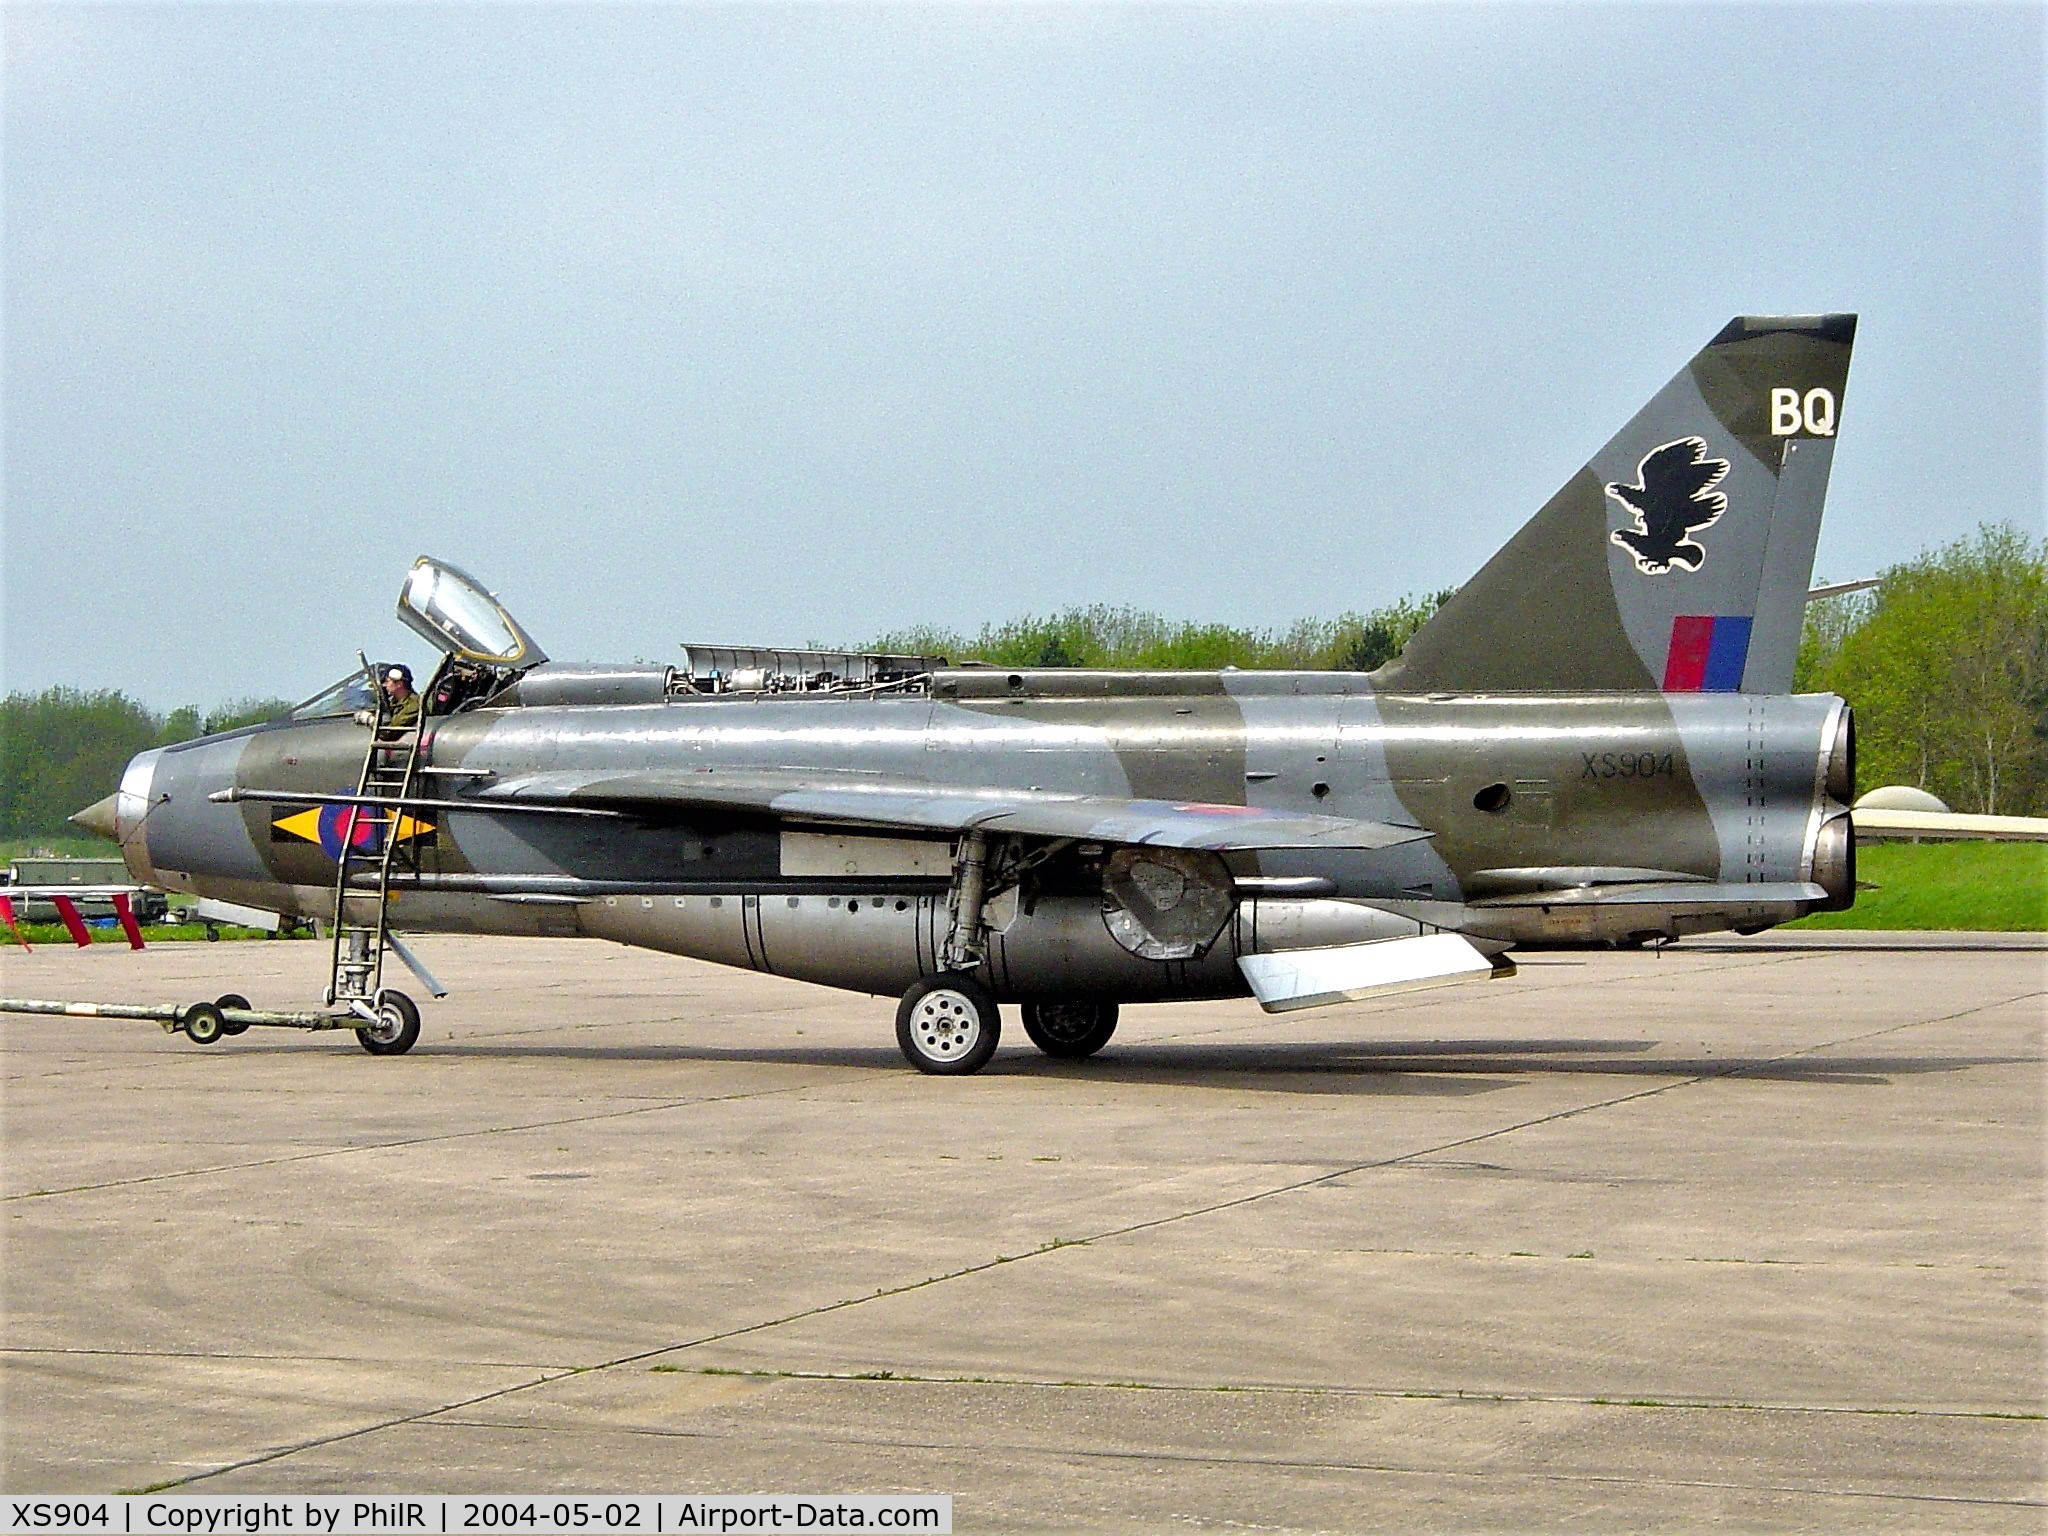 XS904, 1966 English Electric Lightning F.6 C/N 95250, On display at the May 2004 Bruntingthorpe Open Day, alas no more.